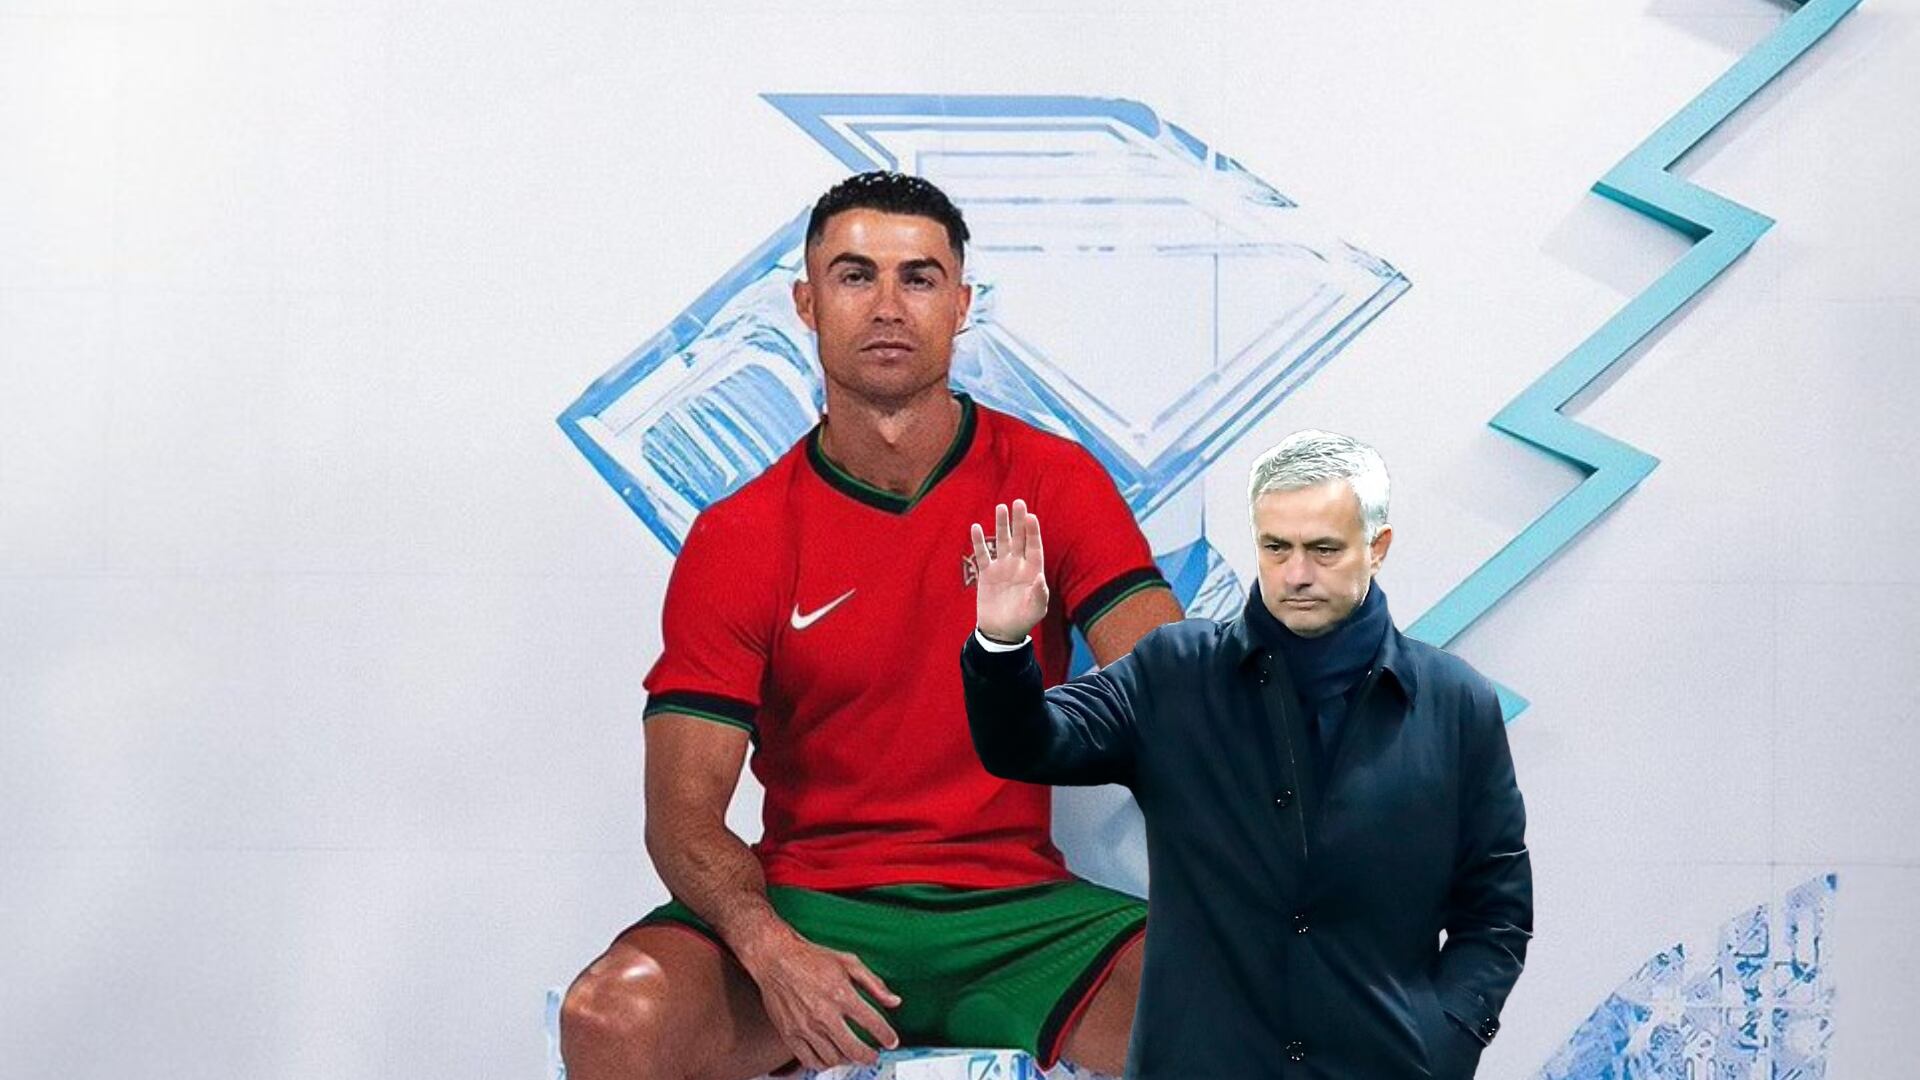 Besides Cristiano, the players with whom Mourinho would be reunited if he makes his dream of coaching Portugal come true